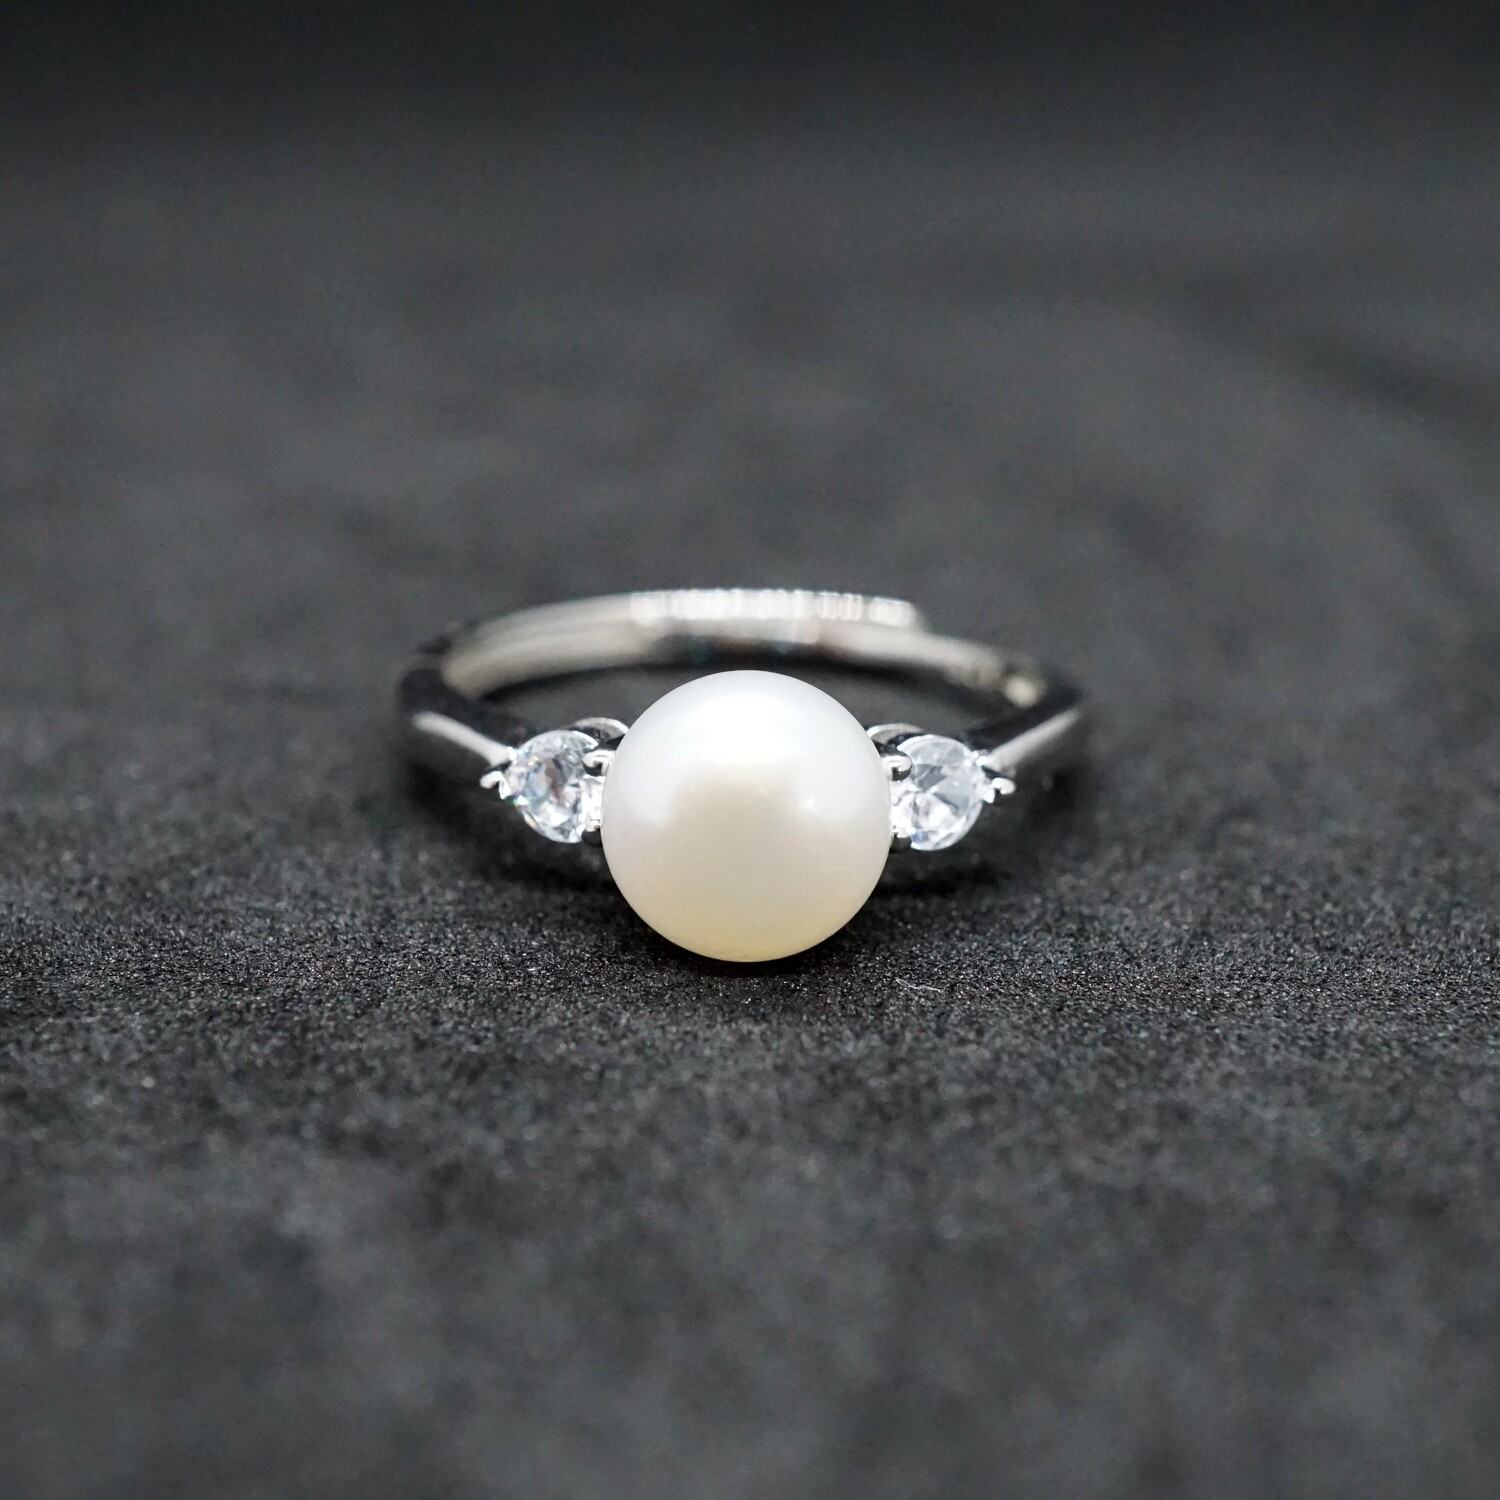 Alice X - White Pearl Ring with 2 Beautiful Crystals